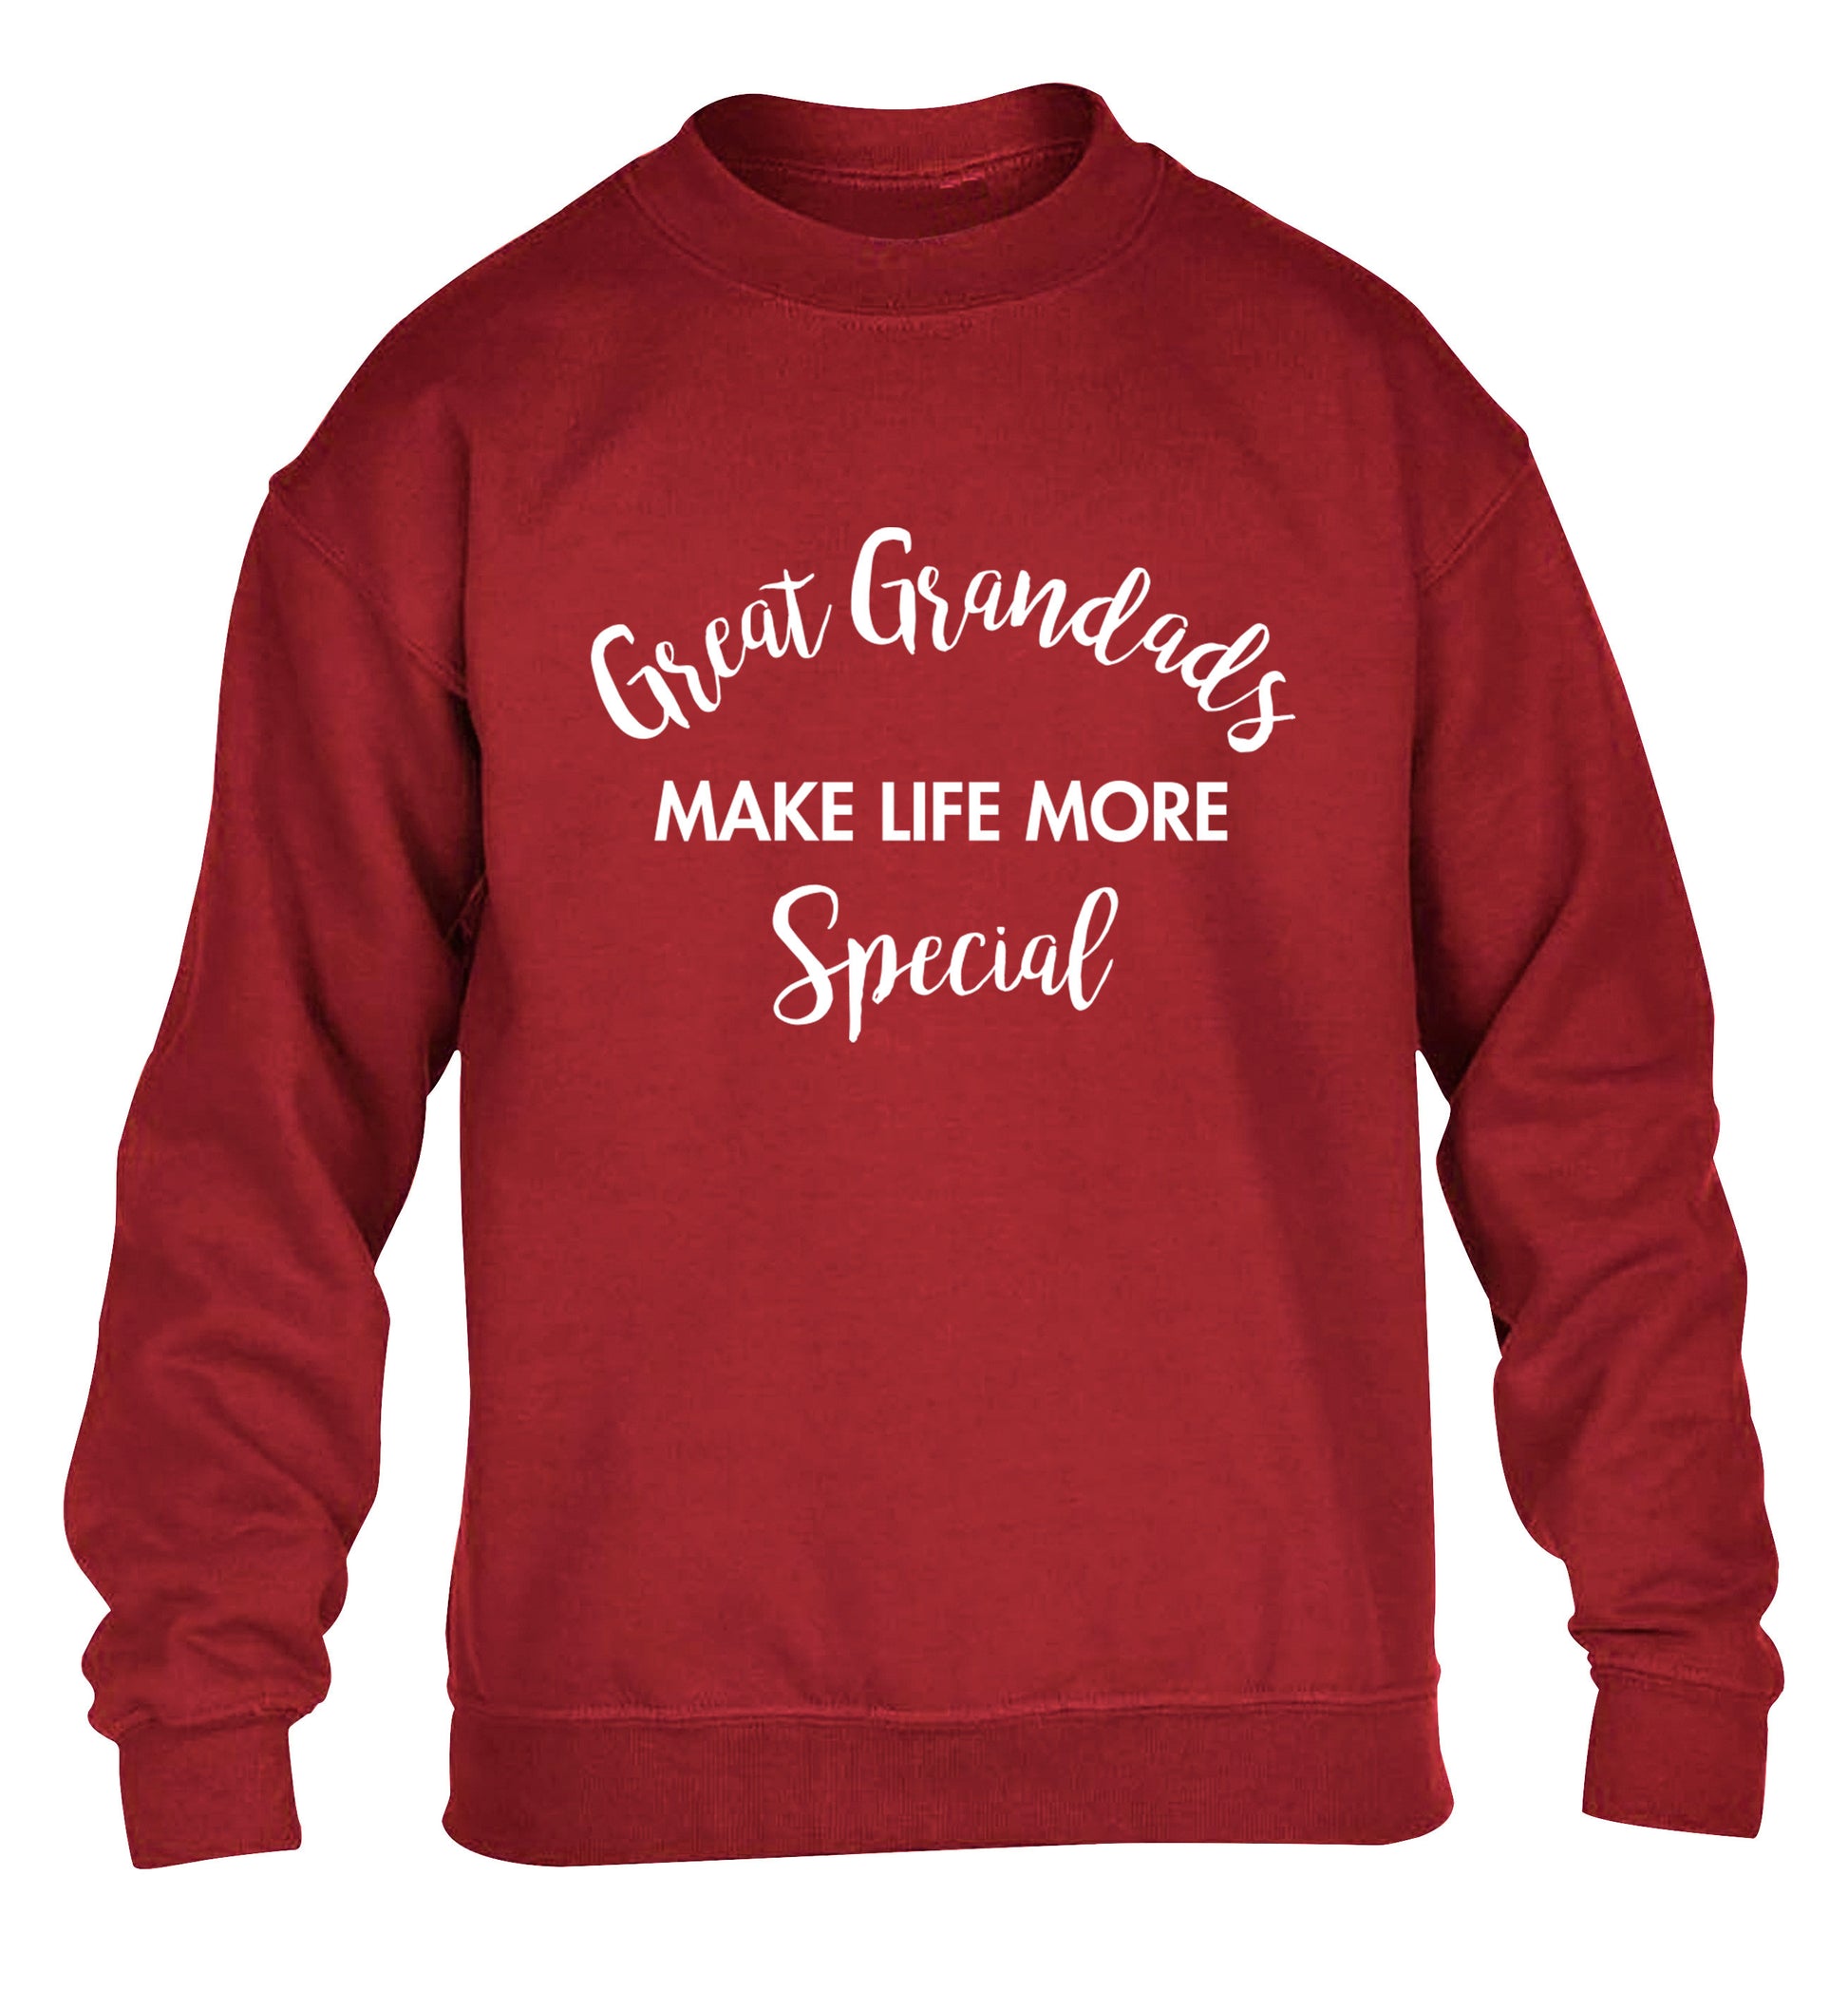 Great Grandads make life more special children's grey sweater 12-14 Years